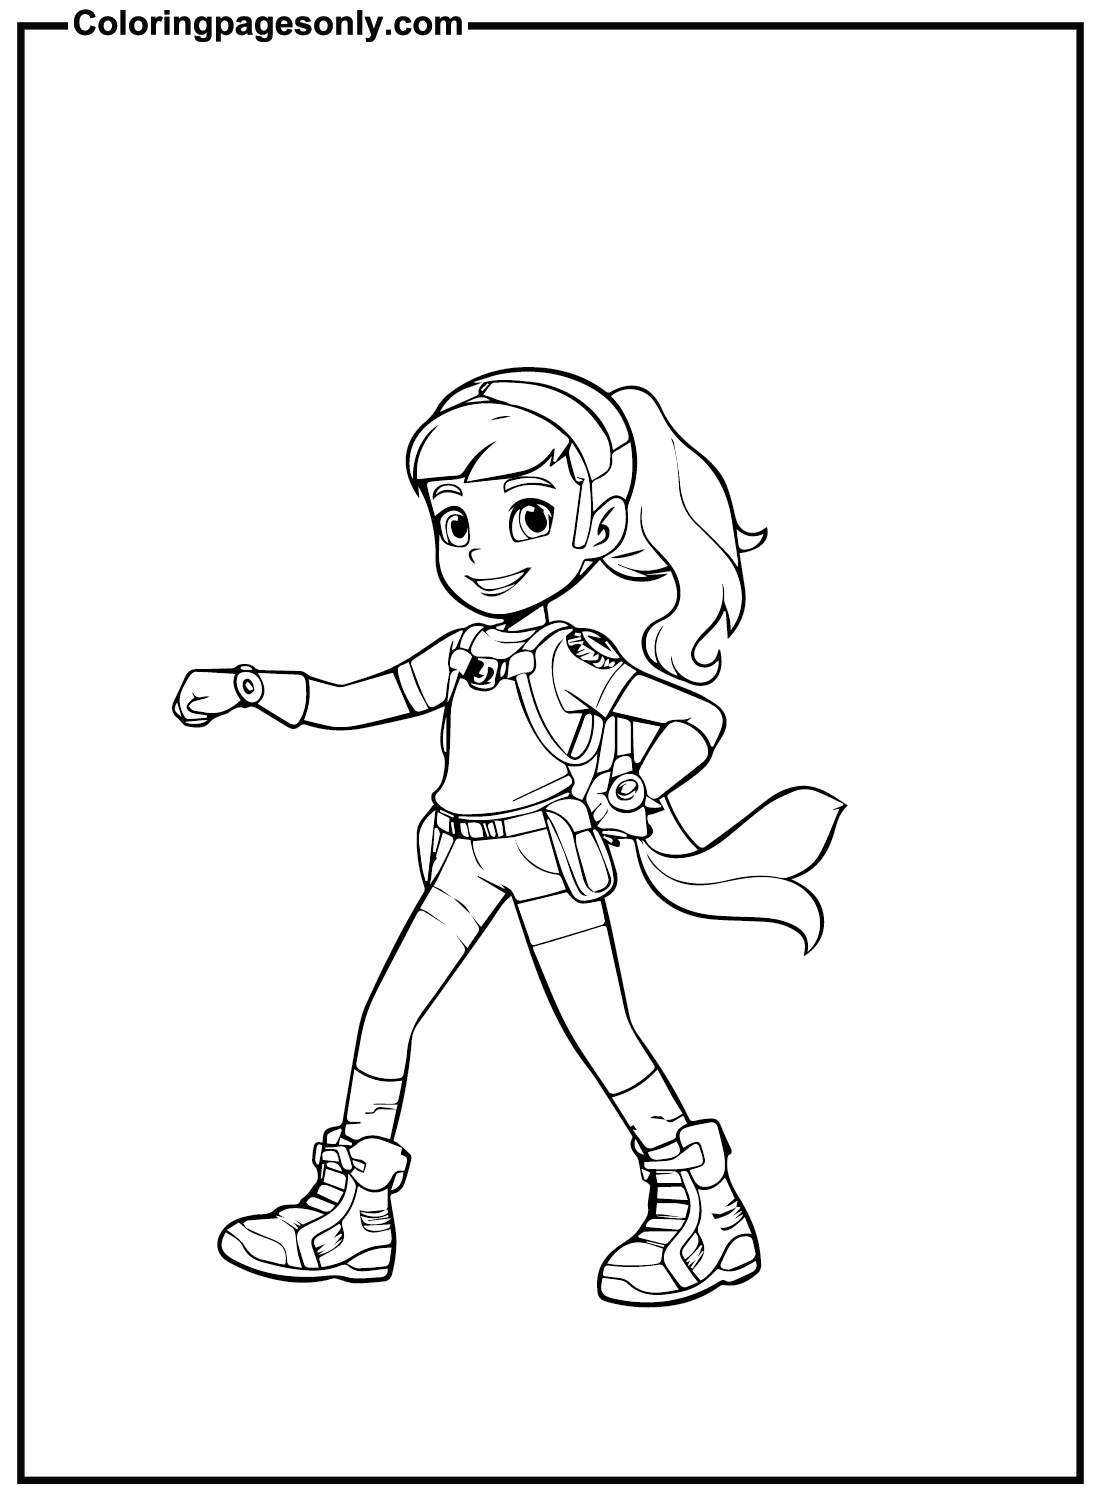 Rainbow Rangers To Print Coloring Pages